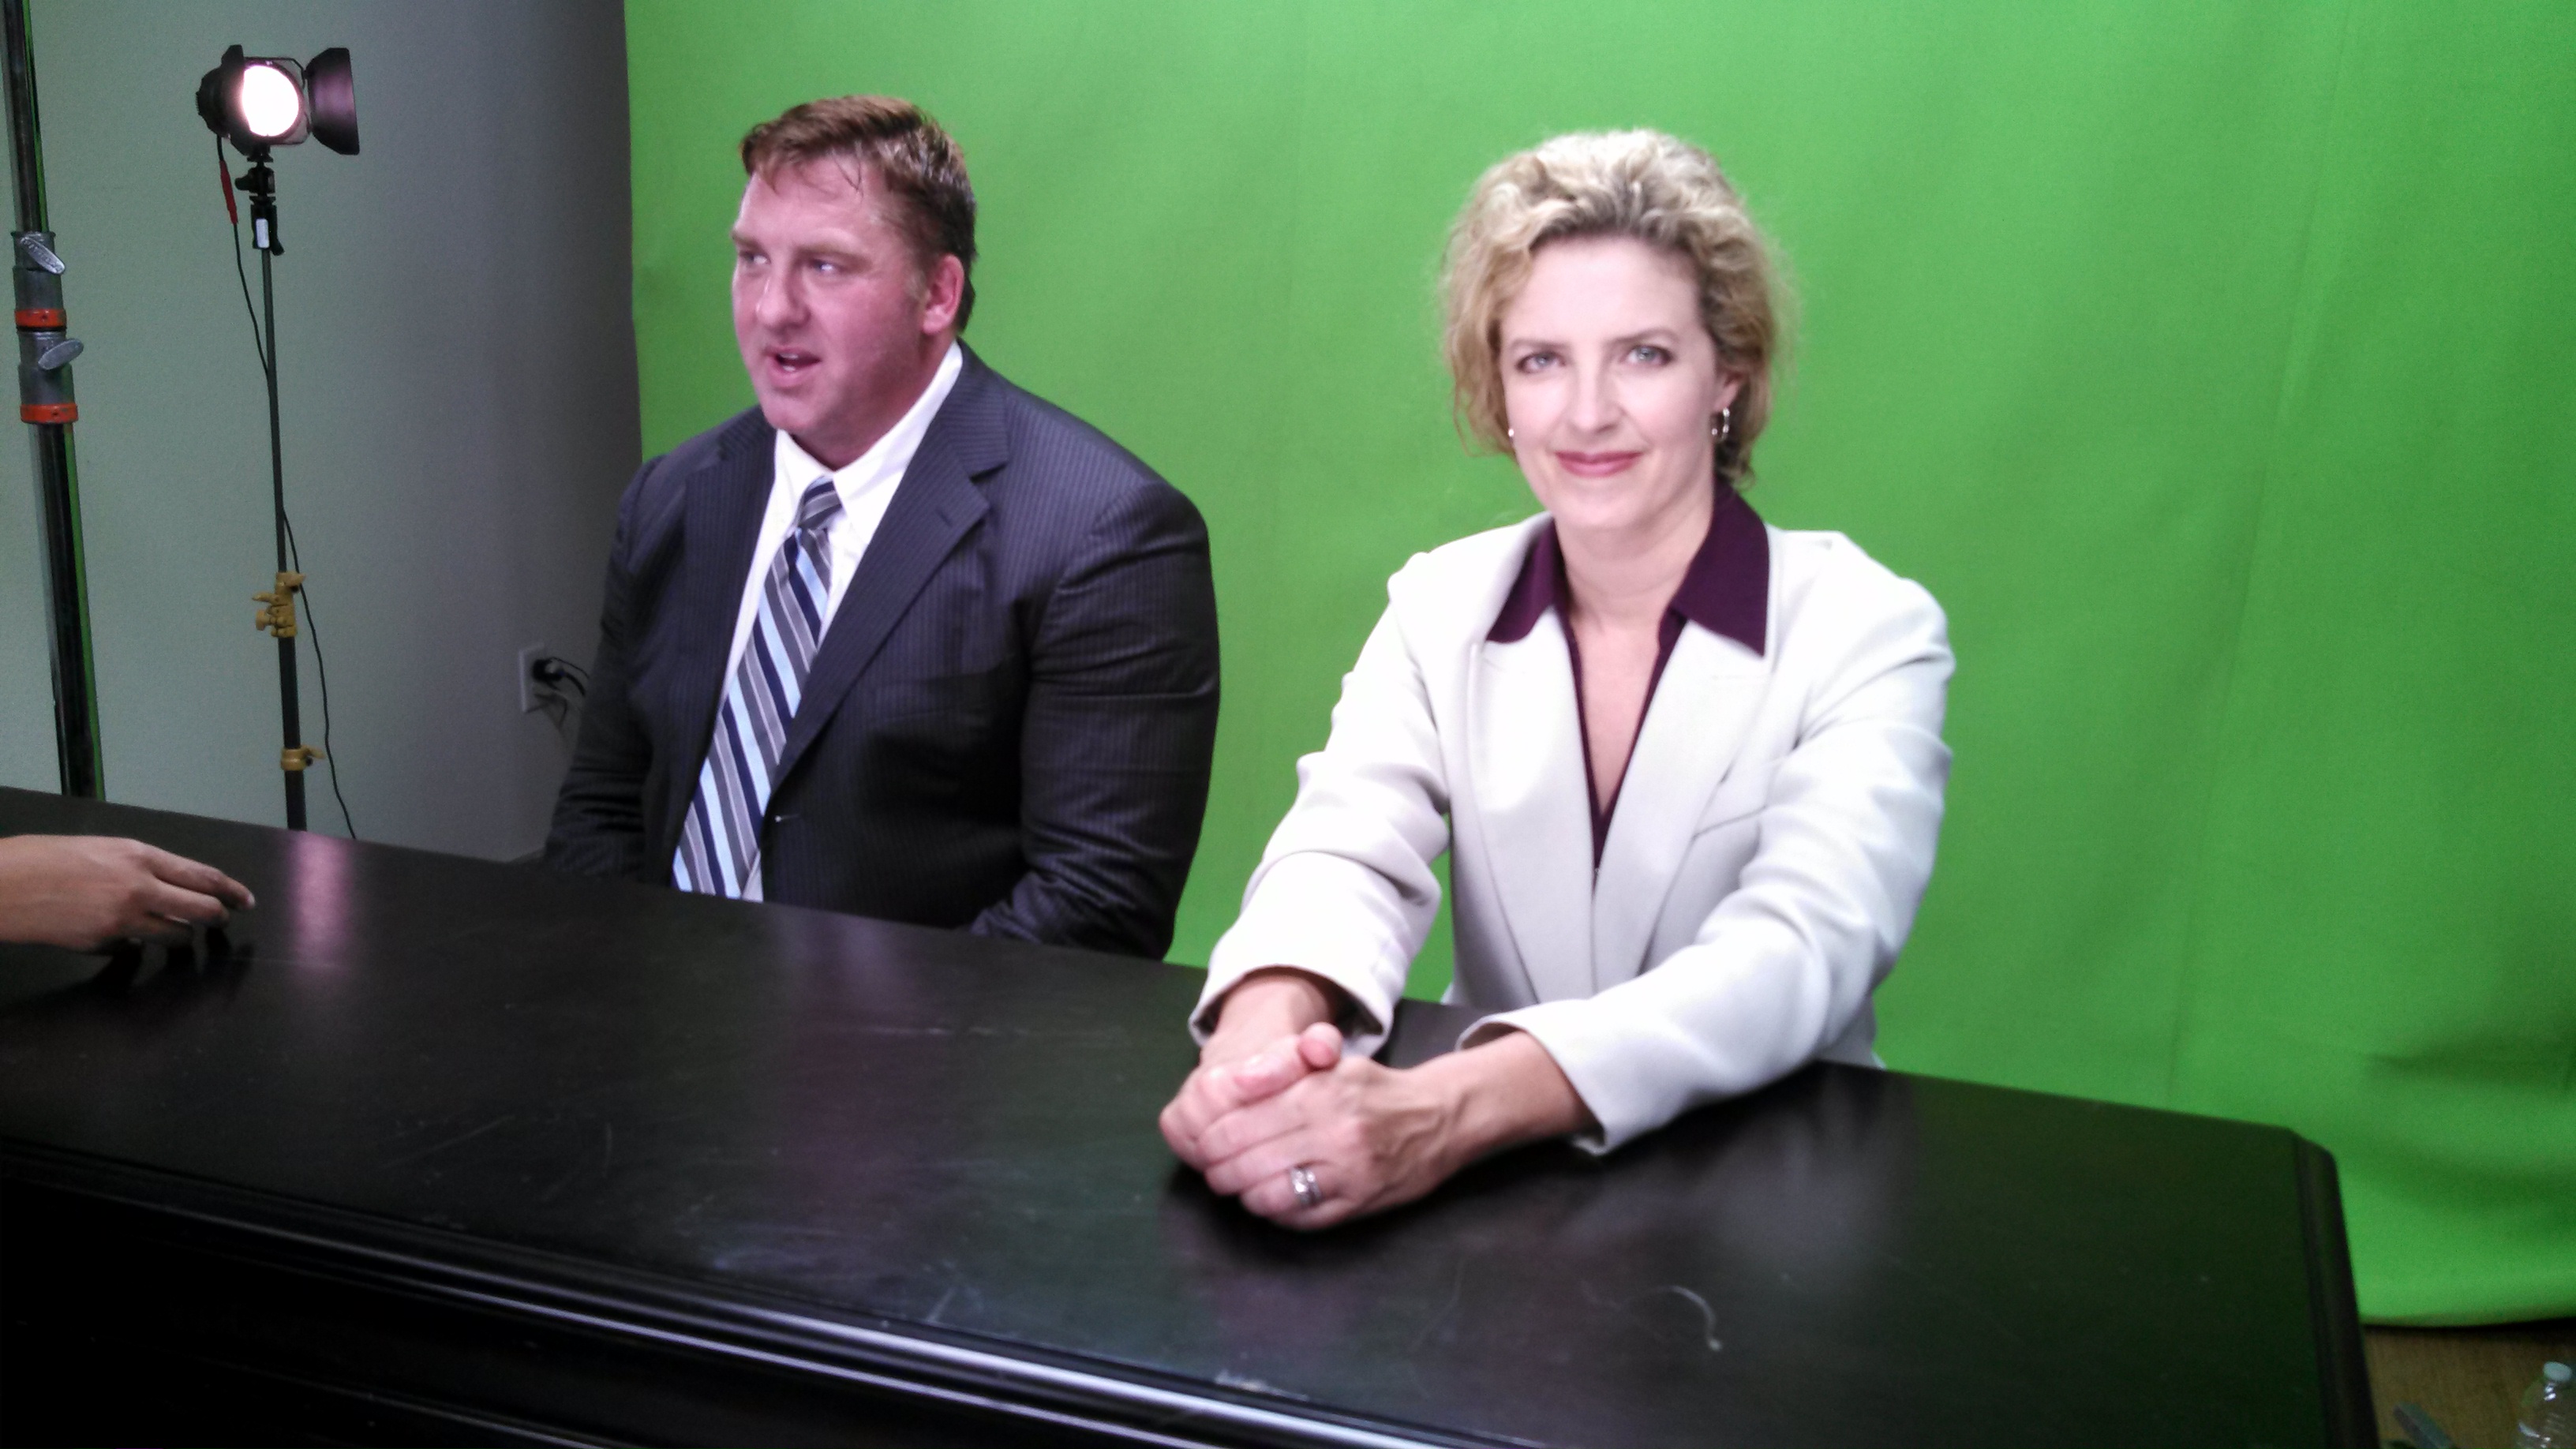 Stephanie Roede as a news anchor on the set of 